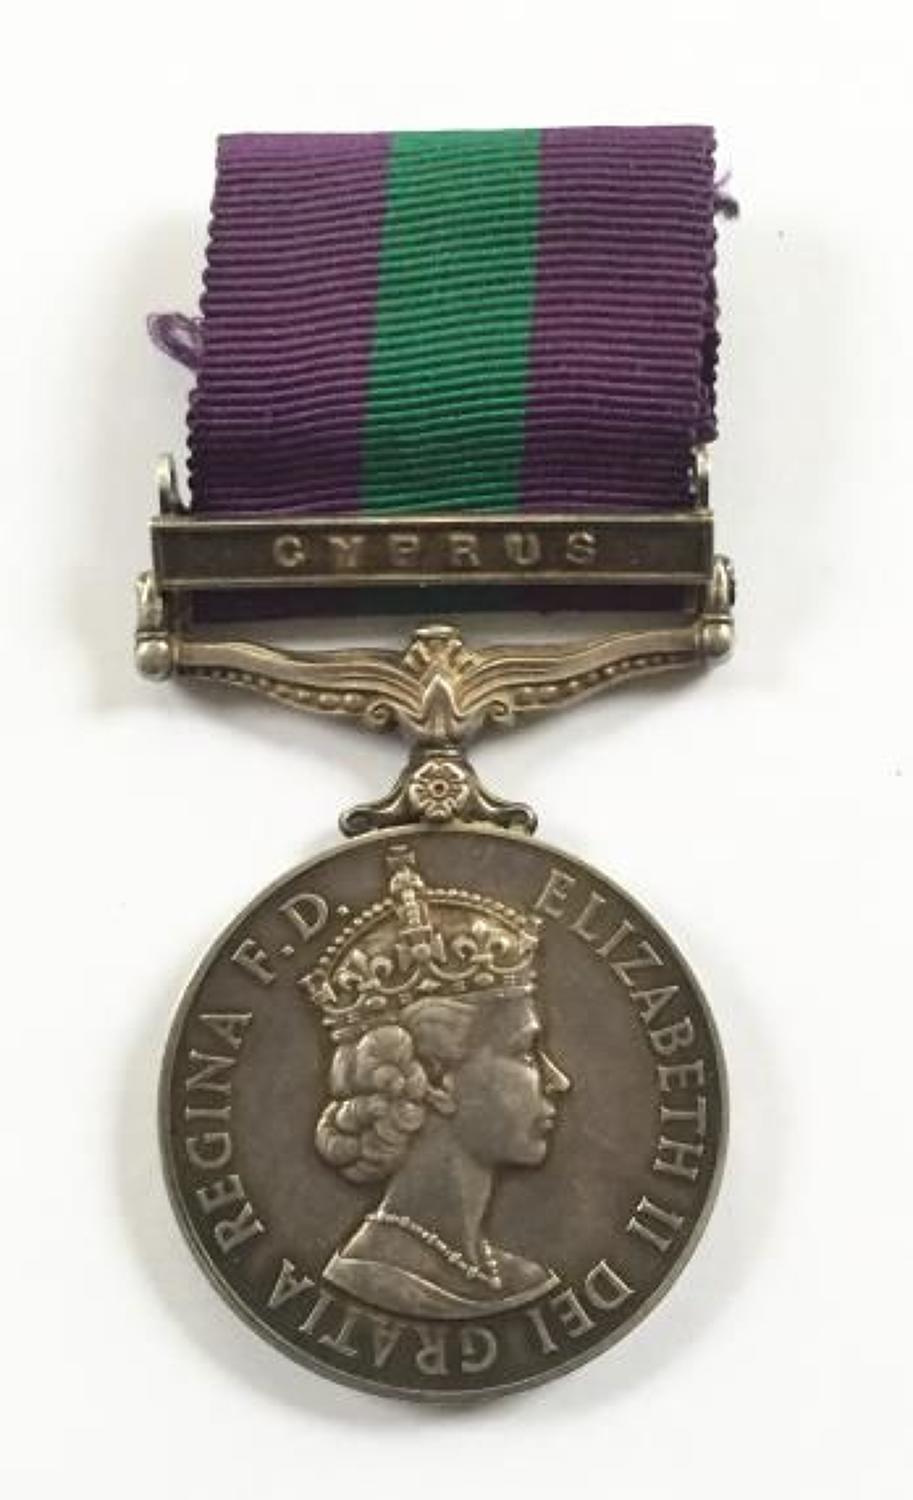 Royal Engineers General Service Medal, clasp 